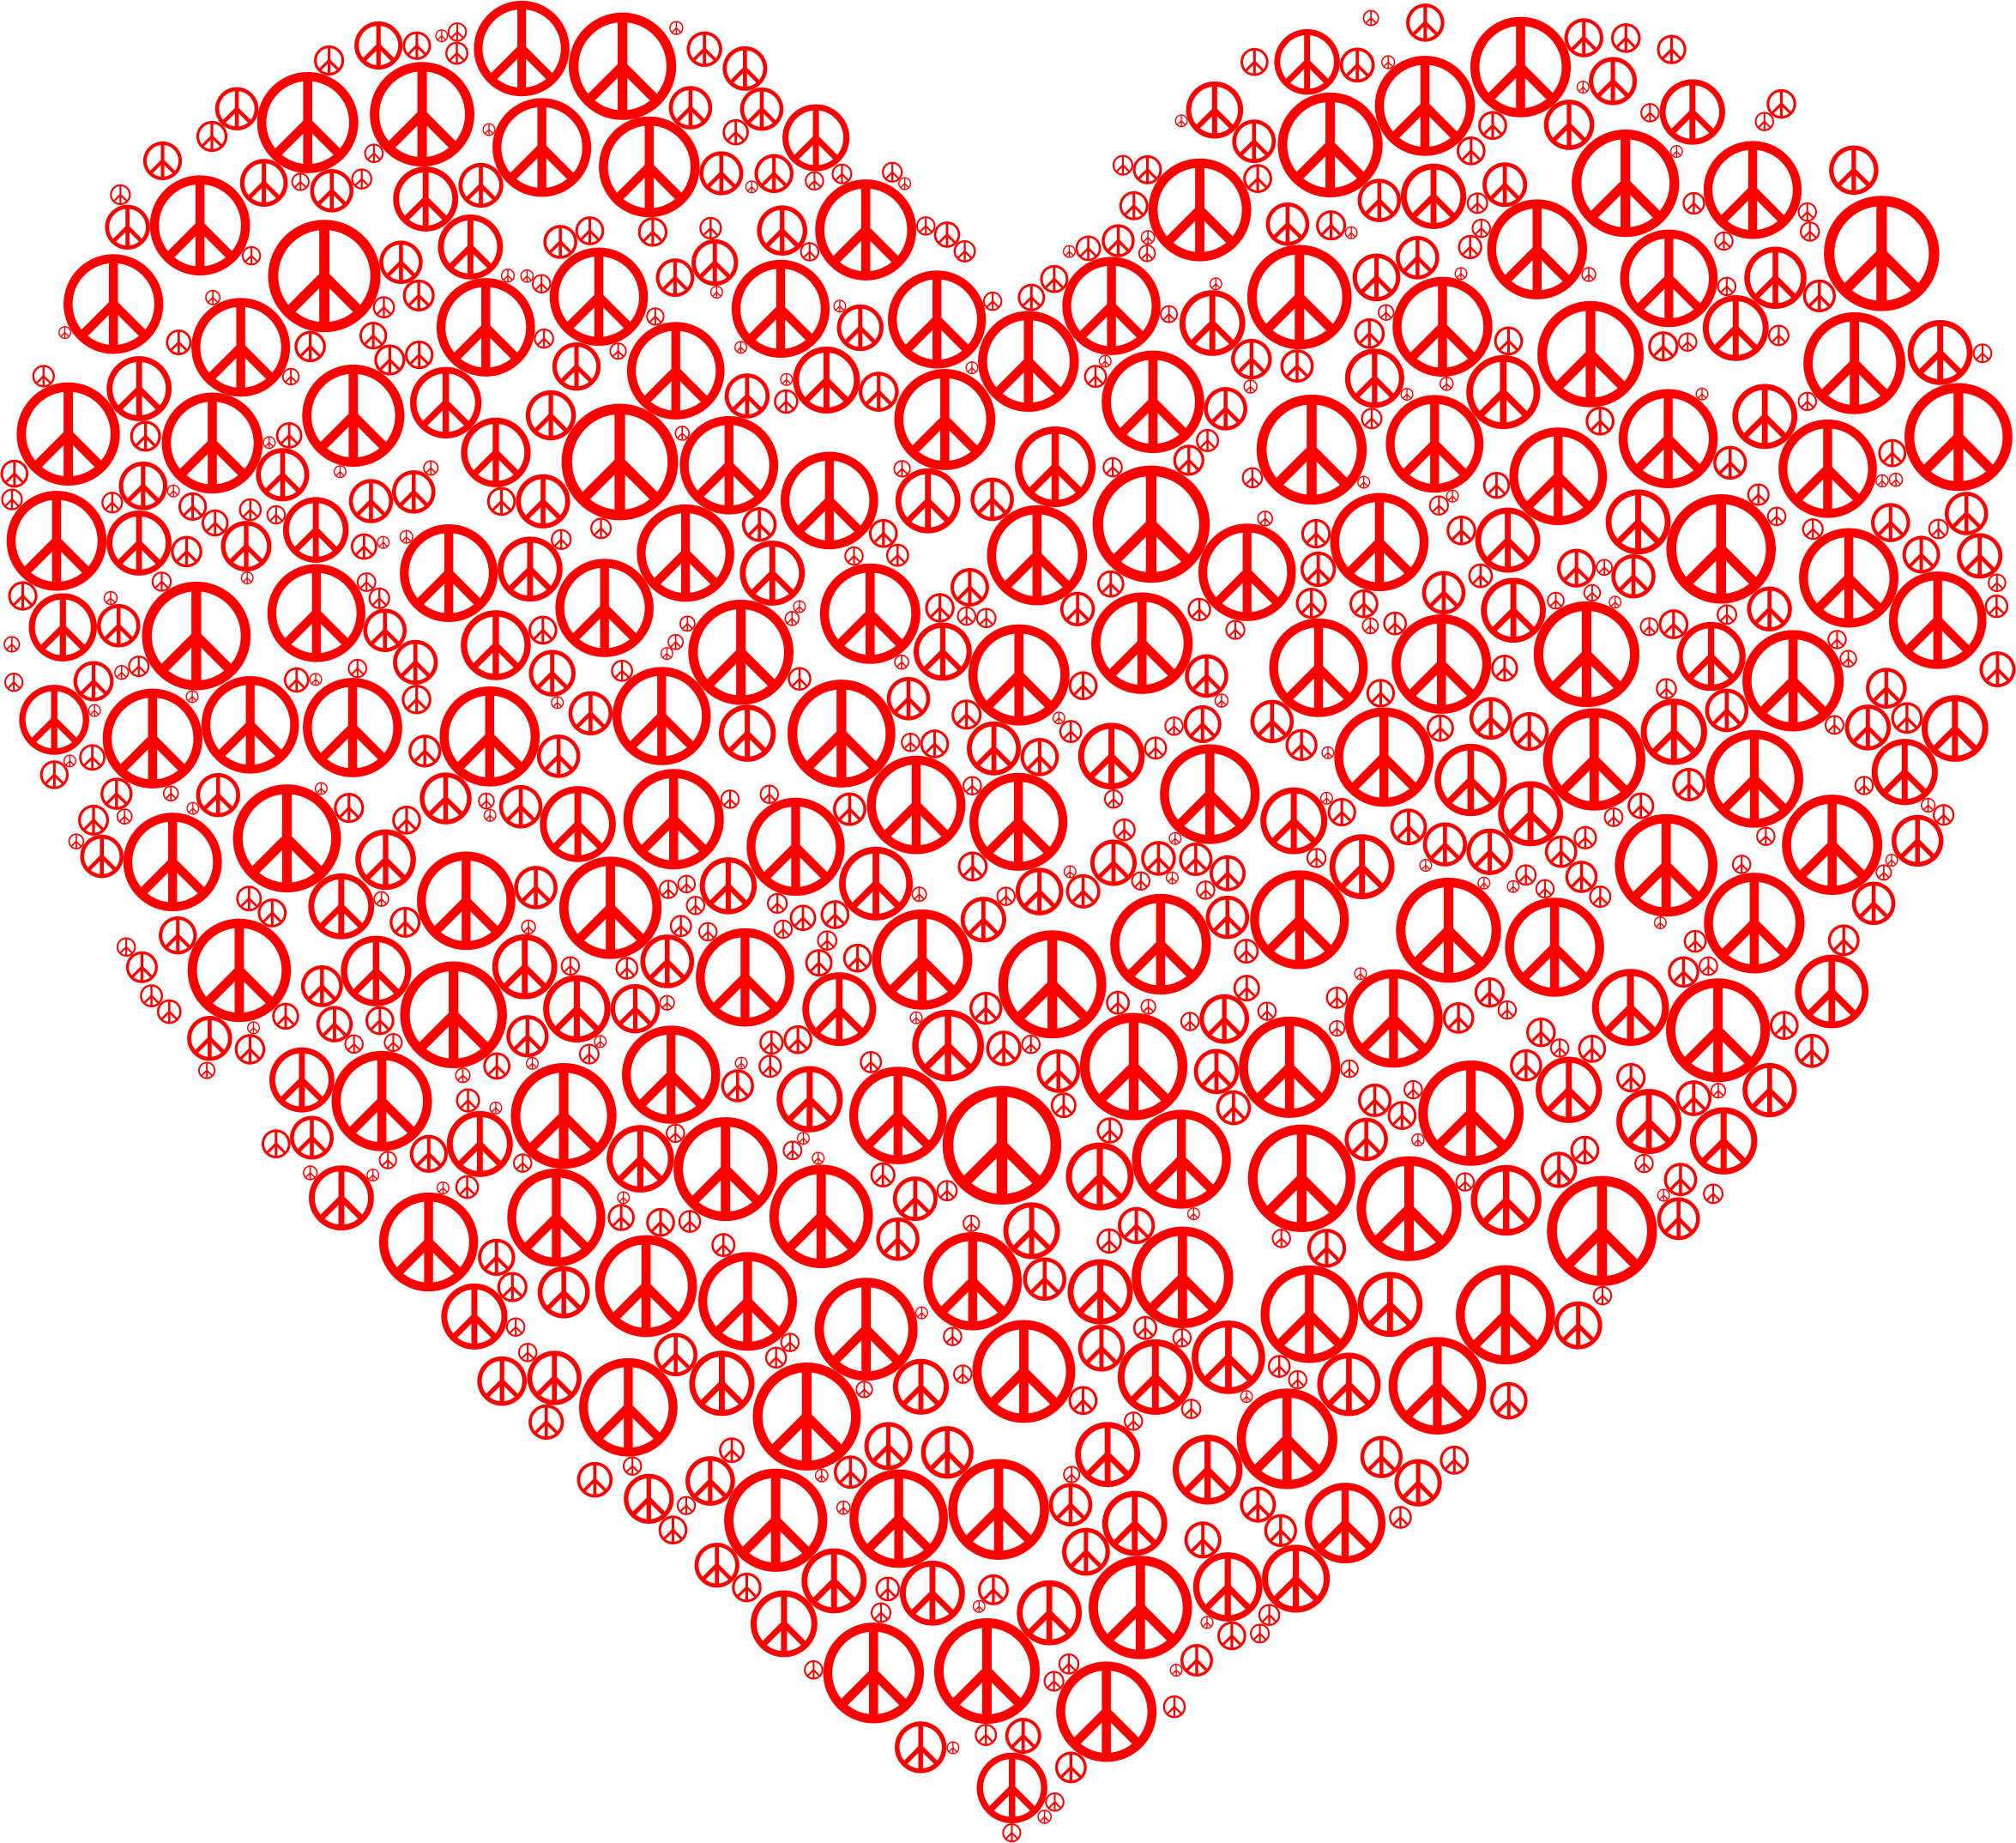 clipart hearts sign